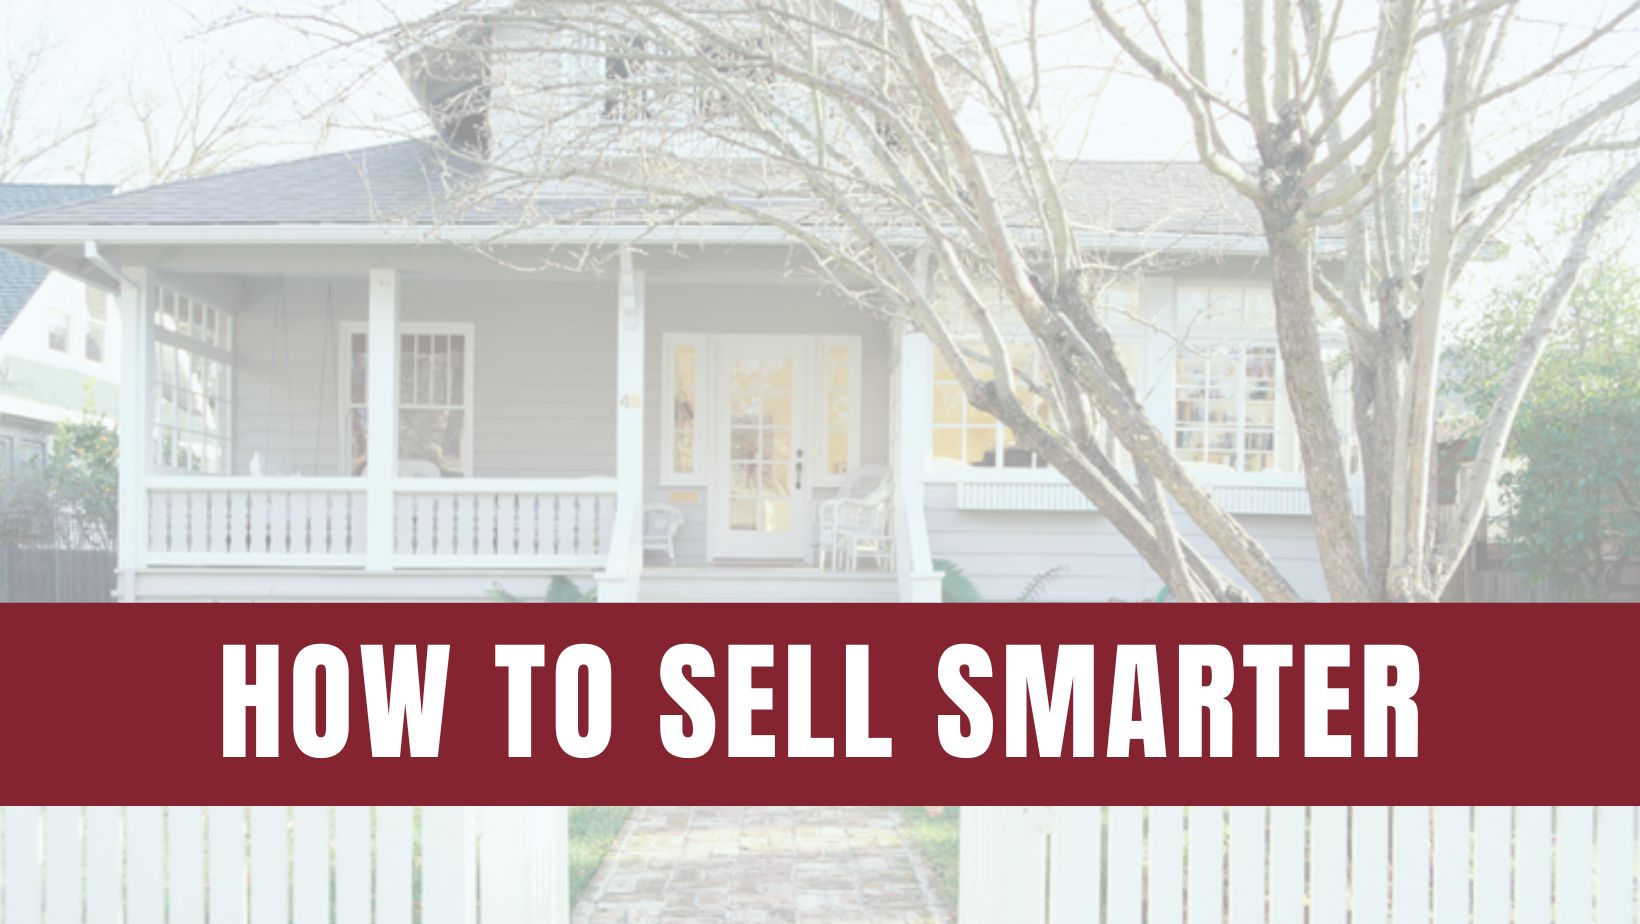 Sell Smarter: Why Working with a Realtor May Beat Going Solo